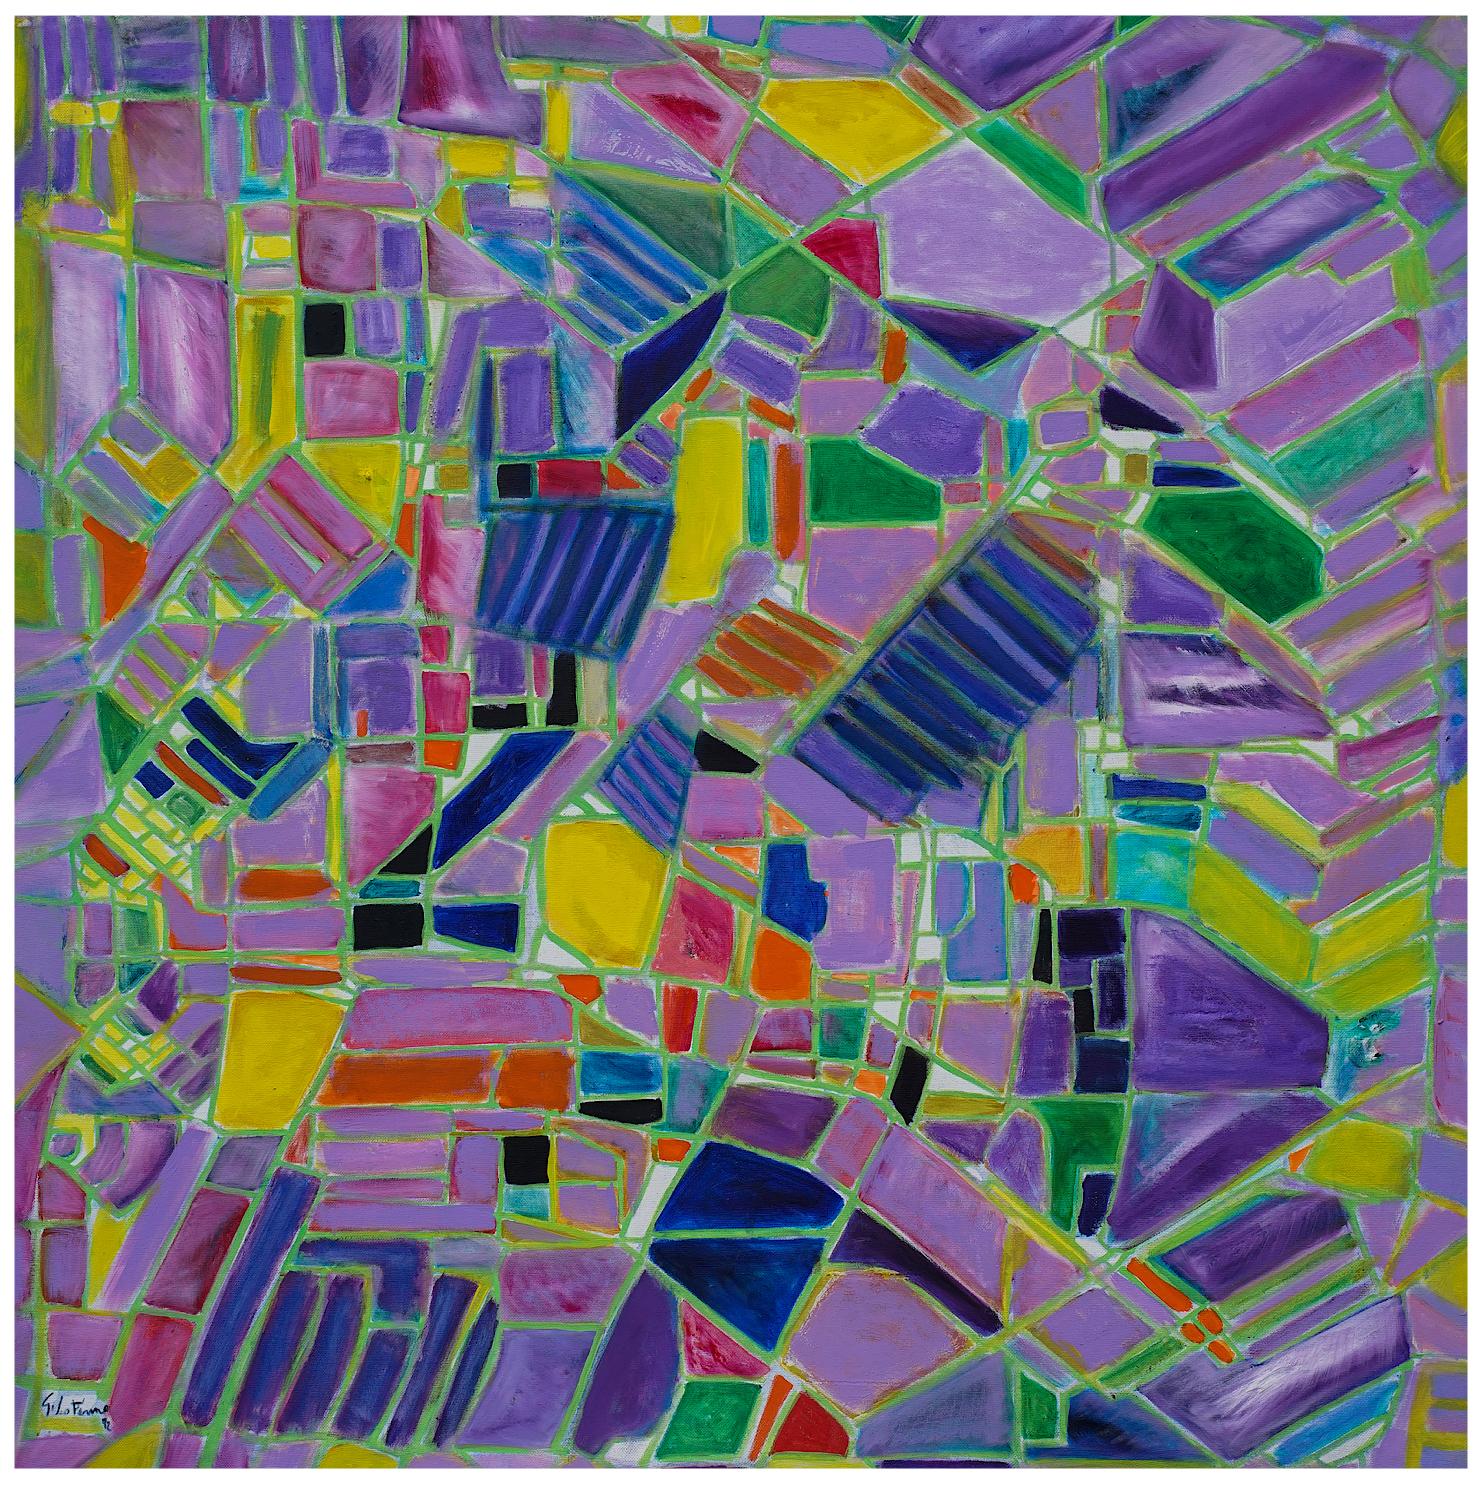 Reticulum is an original artwork realized by the artist Giorgio Lo Fermo in 1995. Oil on canvas; perfect conditions.

This gorgeous painting represents a grid that covers its entire surface. The reticulum series recalls geometrical artworks realized